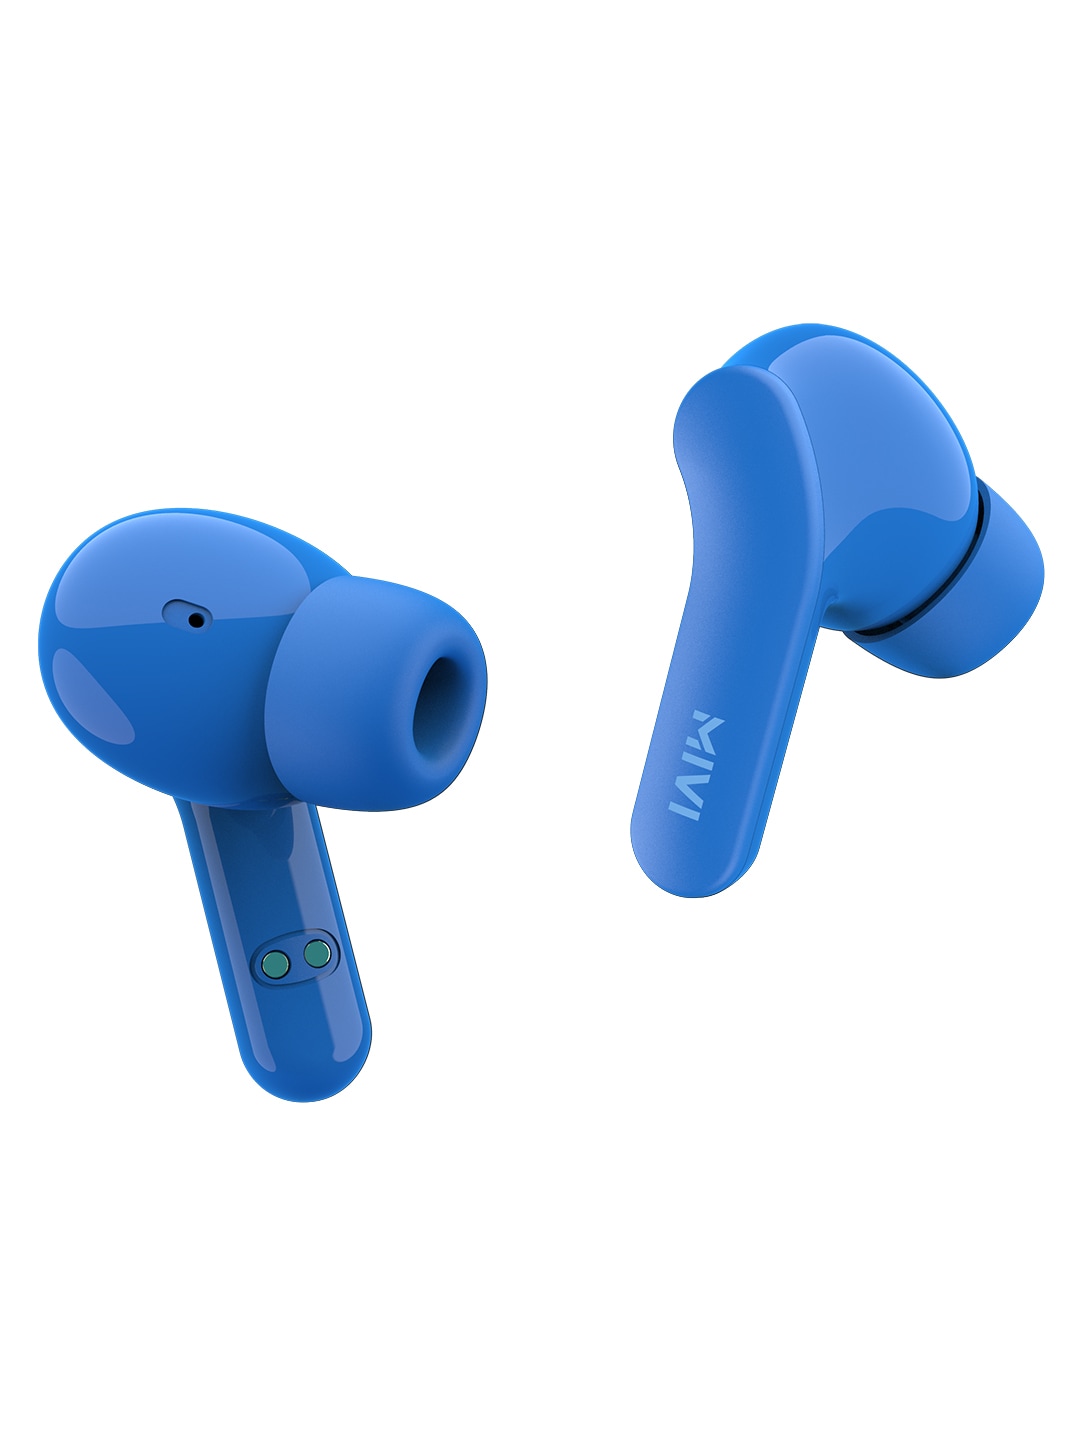 mivi DuoPods A25 True Wireless Earbuds with 30Hours Battery - Midnight Blue Price in India